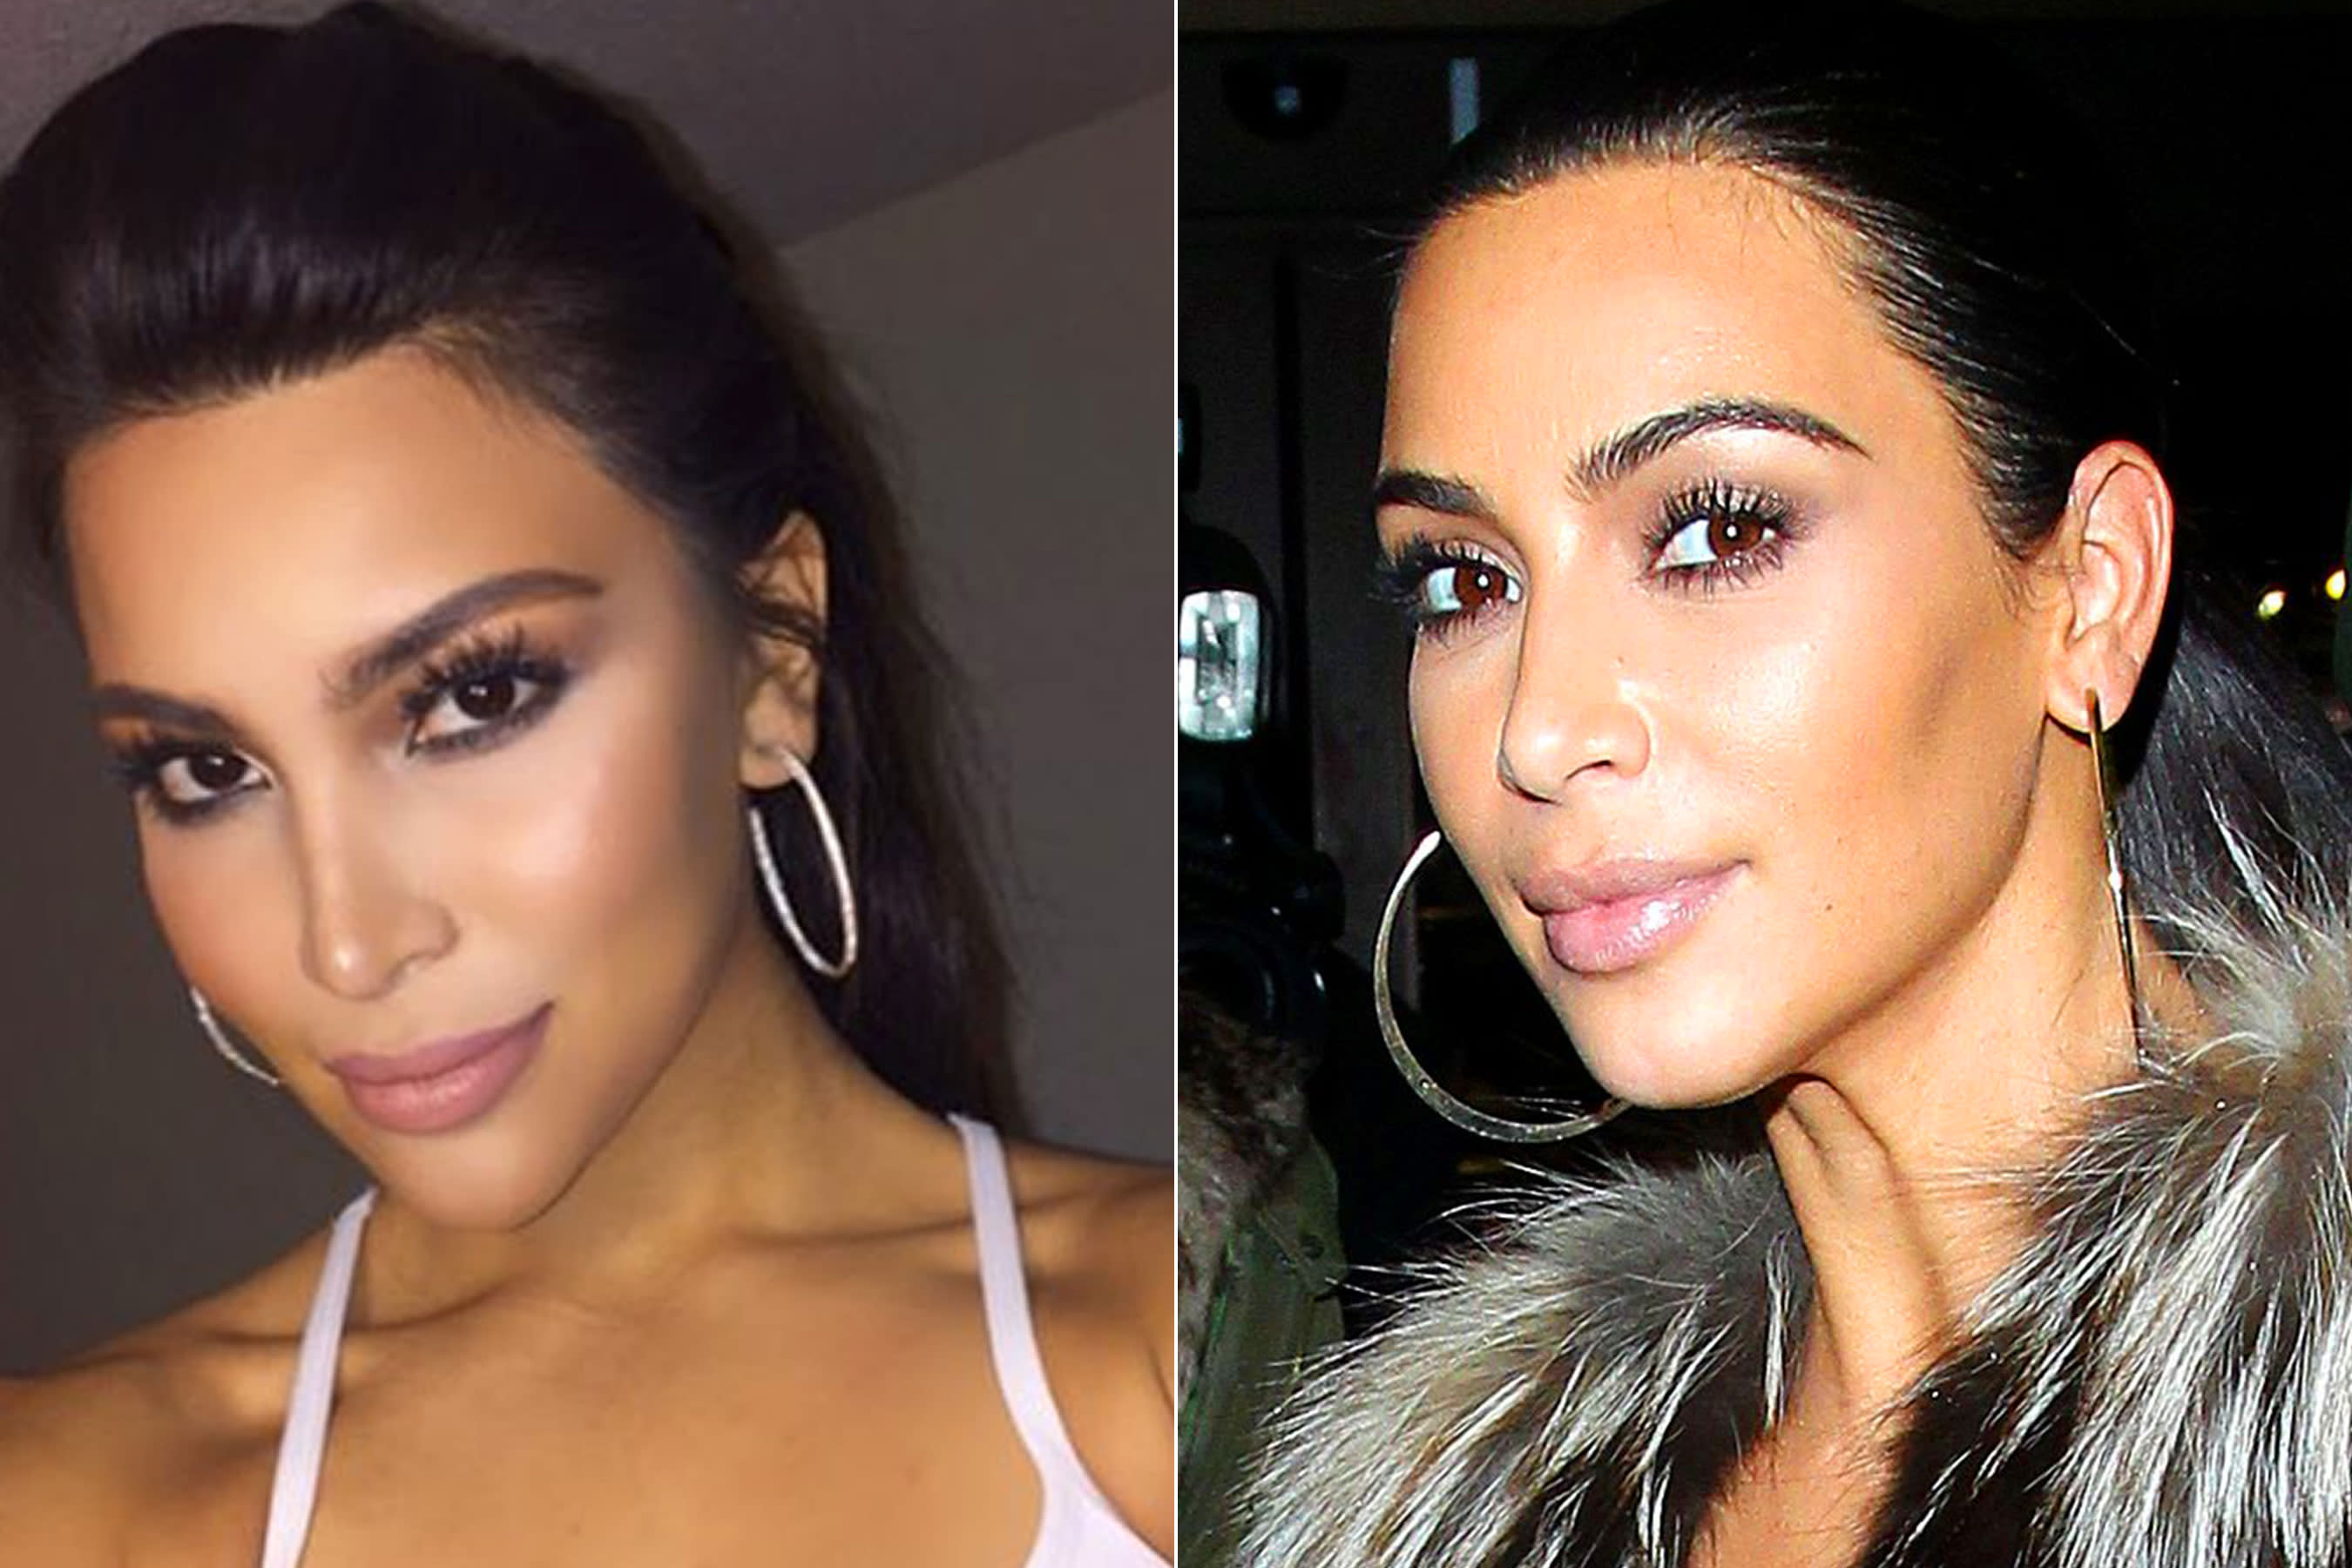 Kim Kardashian Shares Her Thoughts On Fans Getting Plastic Surgery To Look Like Her